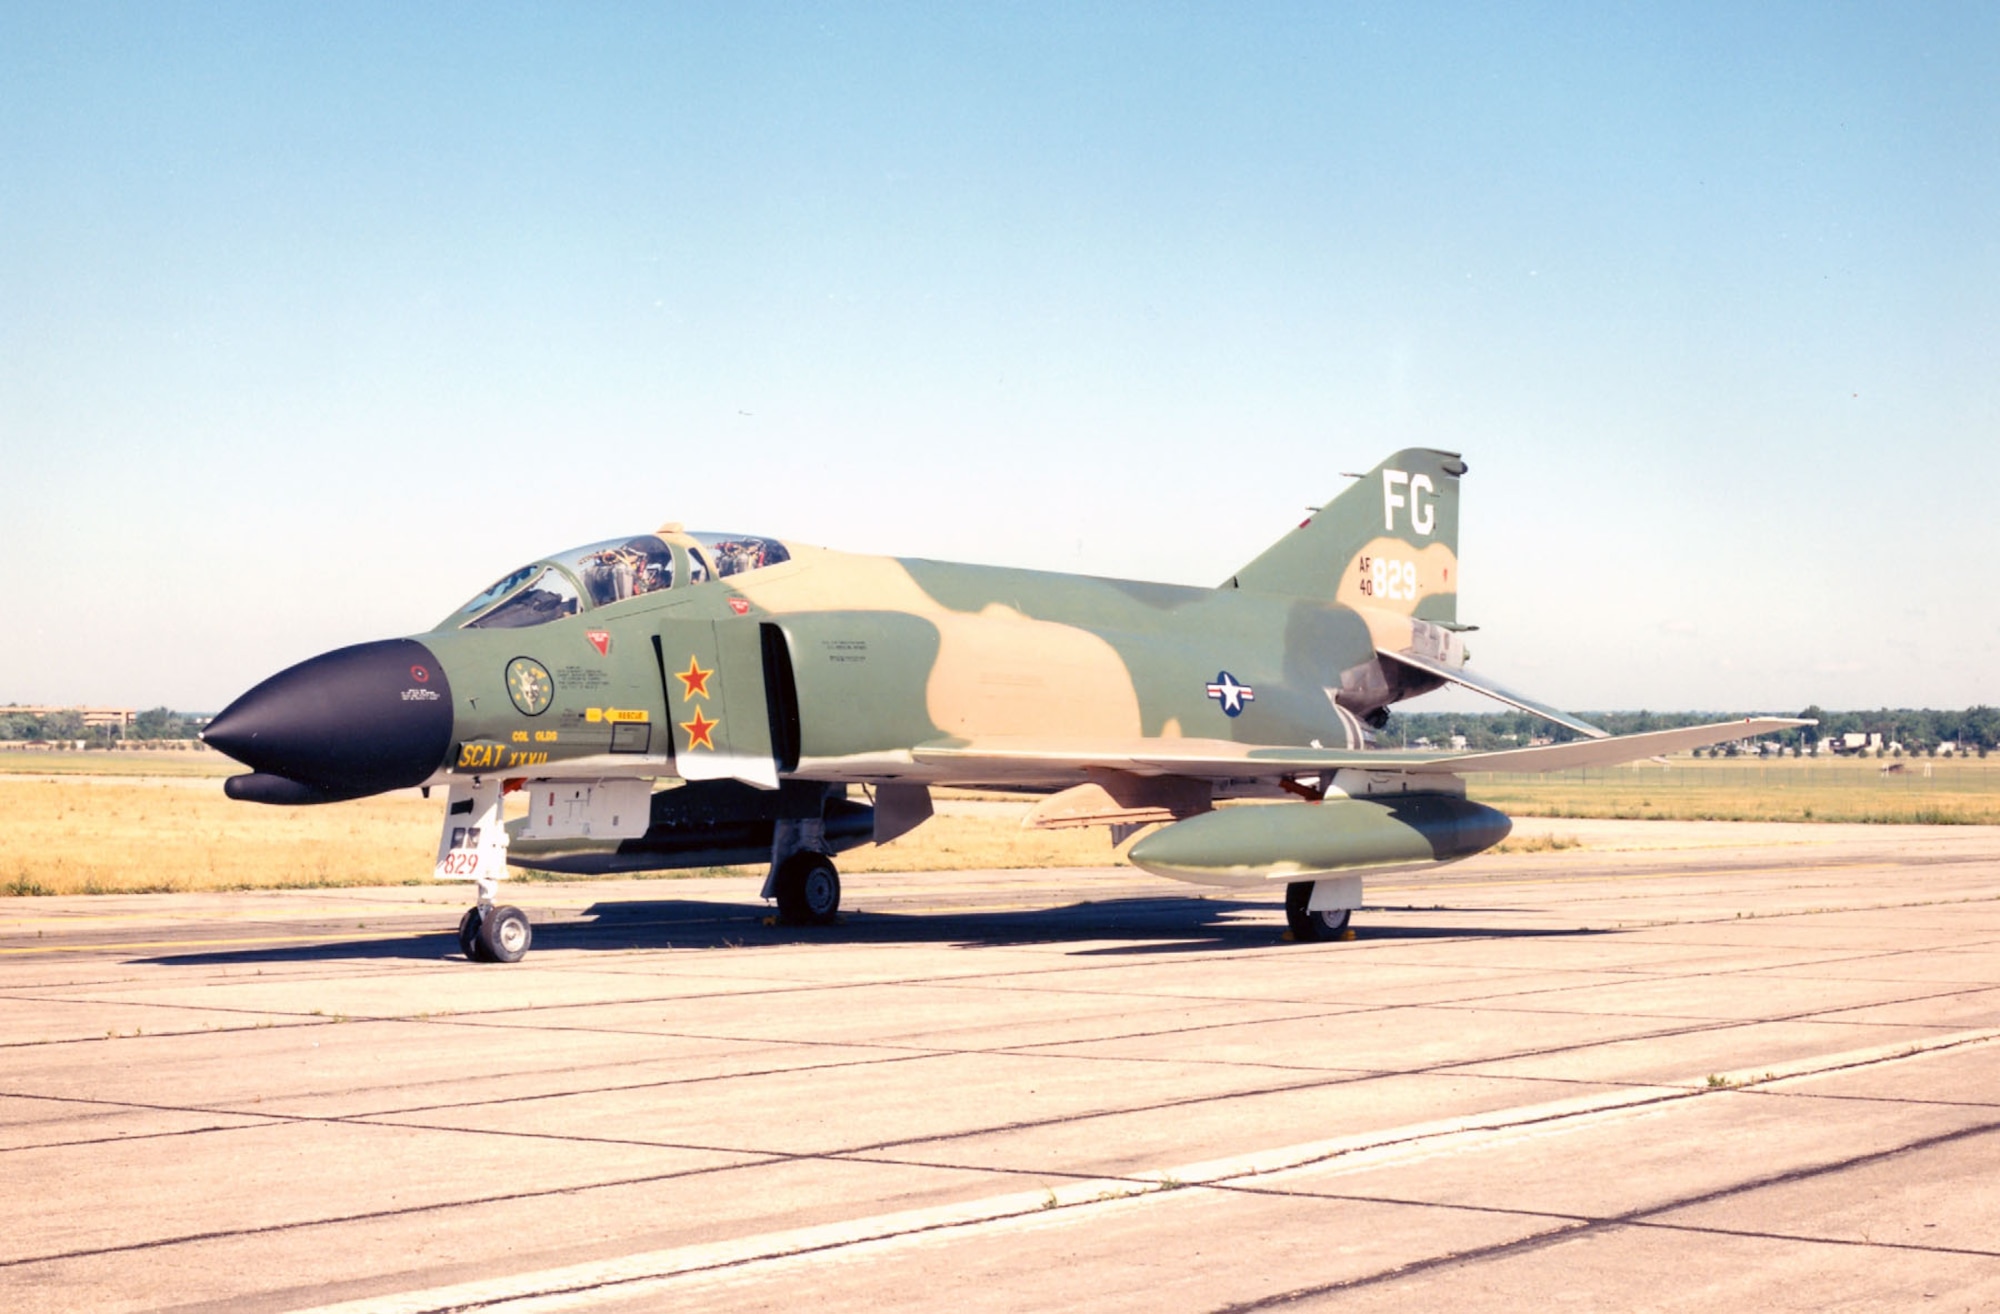 DAYTON, Ohio -- McDonnell Douglas F-4C Phantom II at the National Museum of the United States Air Force. (U.S. Air Force photo)